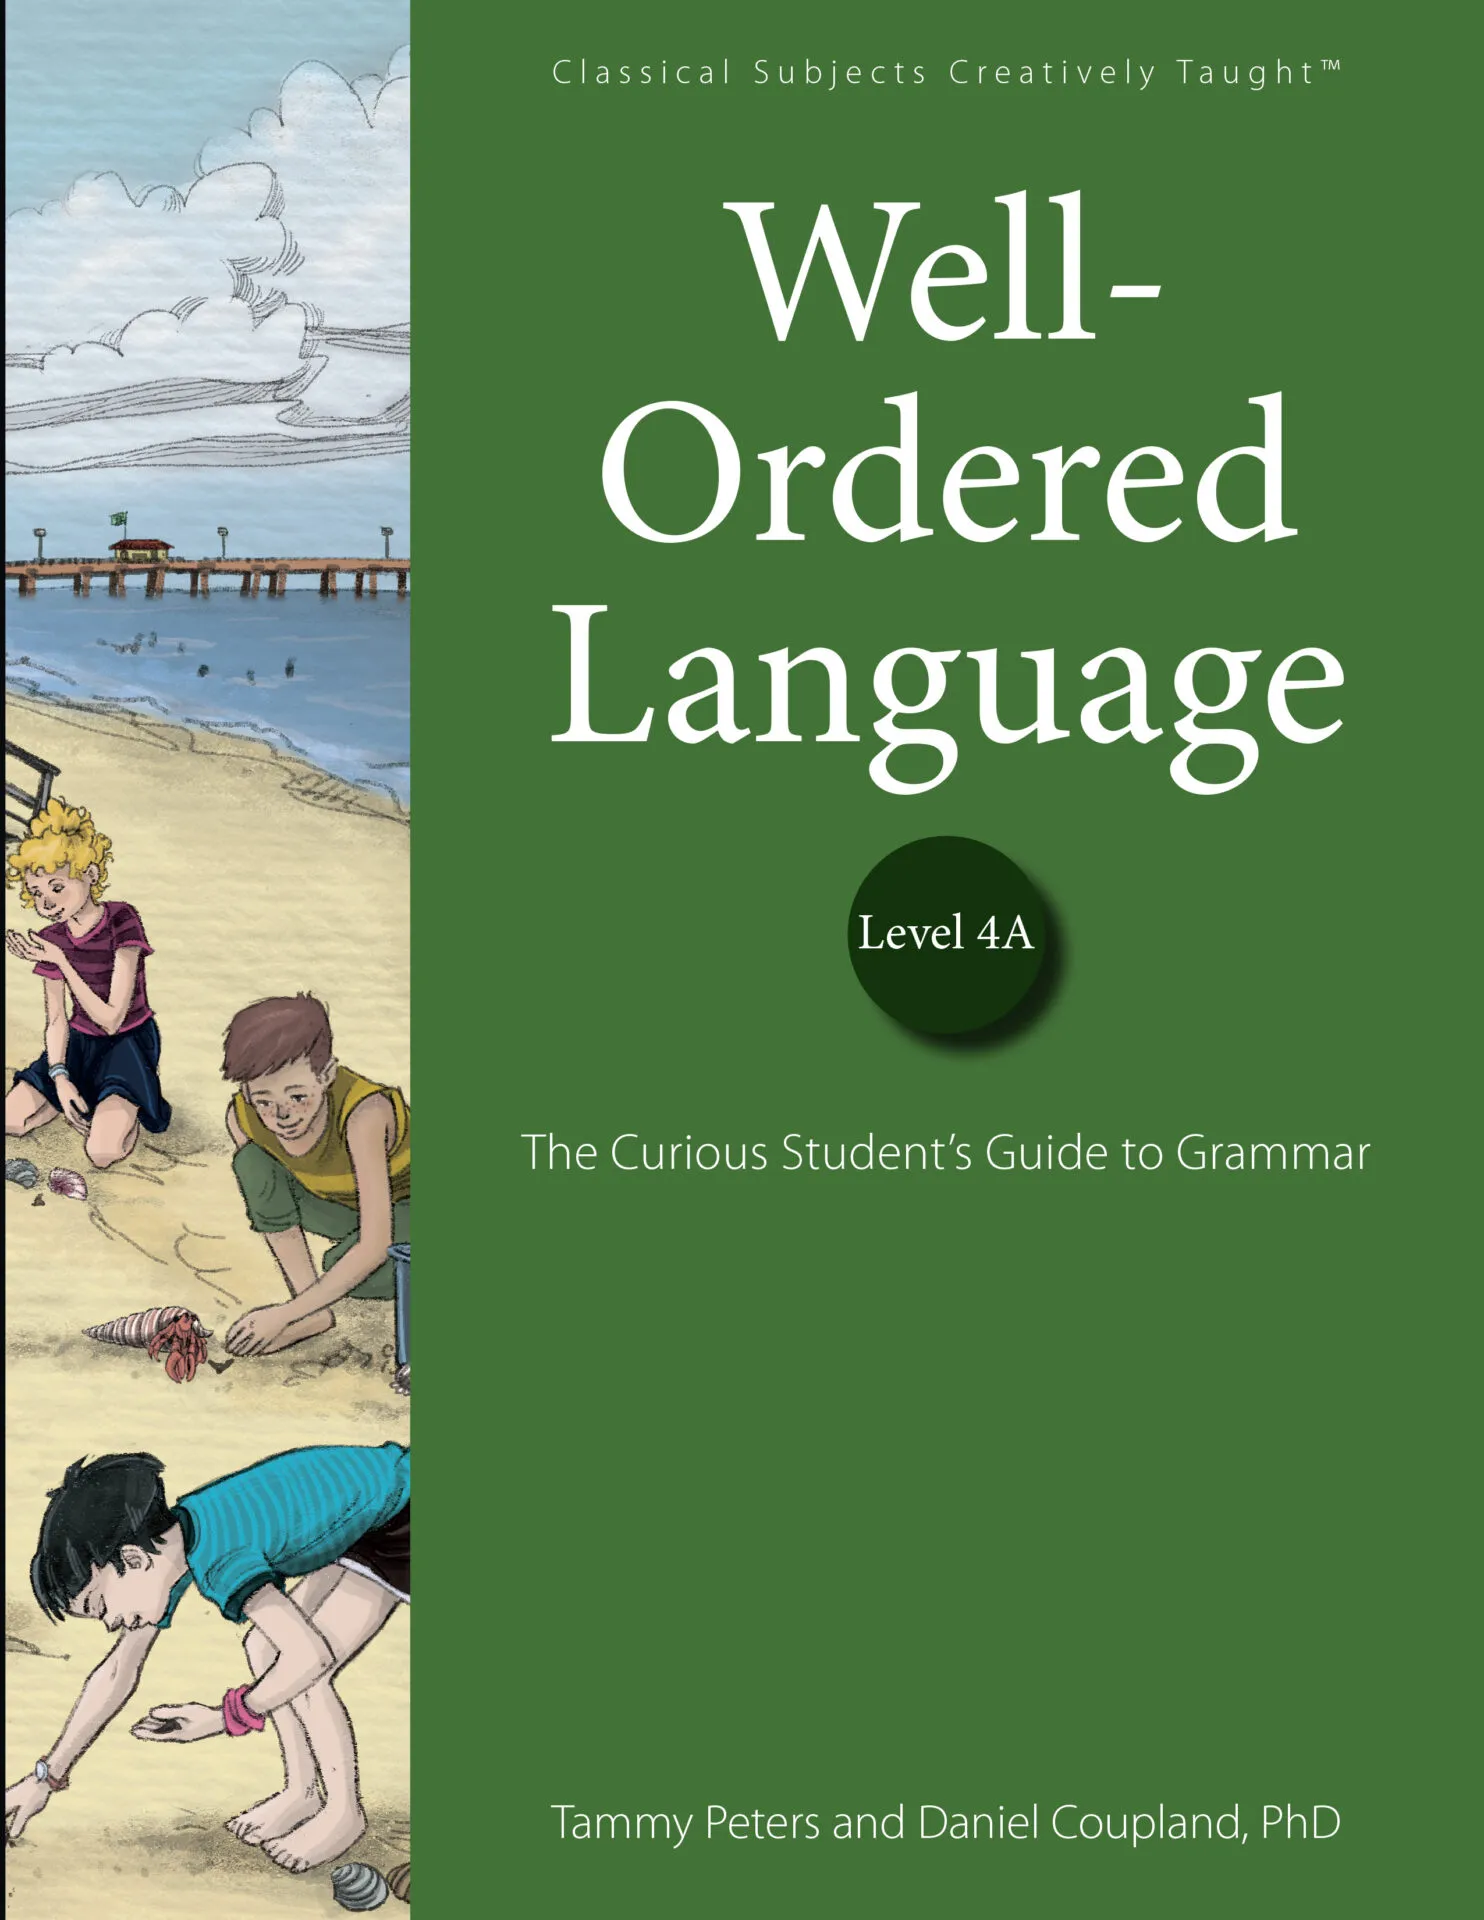 Edition　4A　Student　Language:　Well-Ordered　Books　Classical　Education